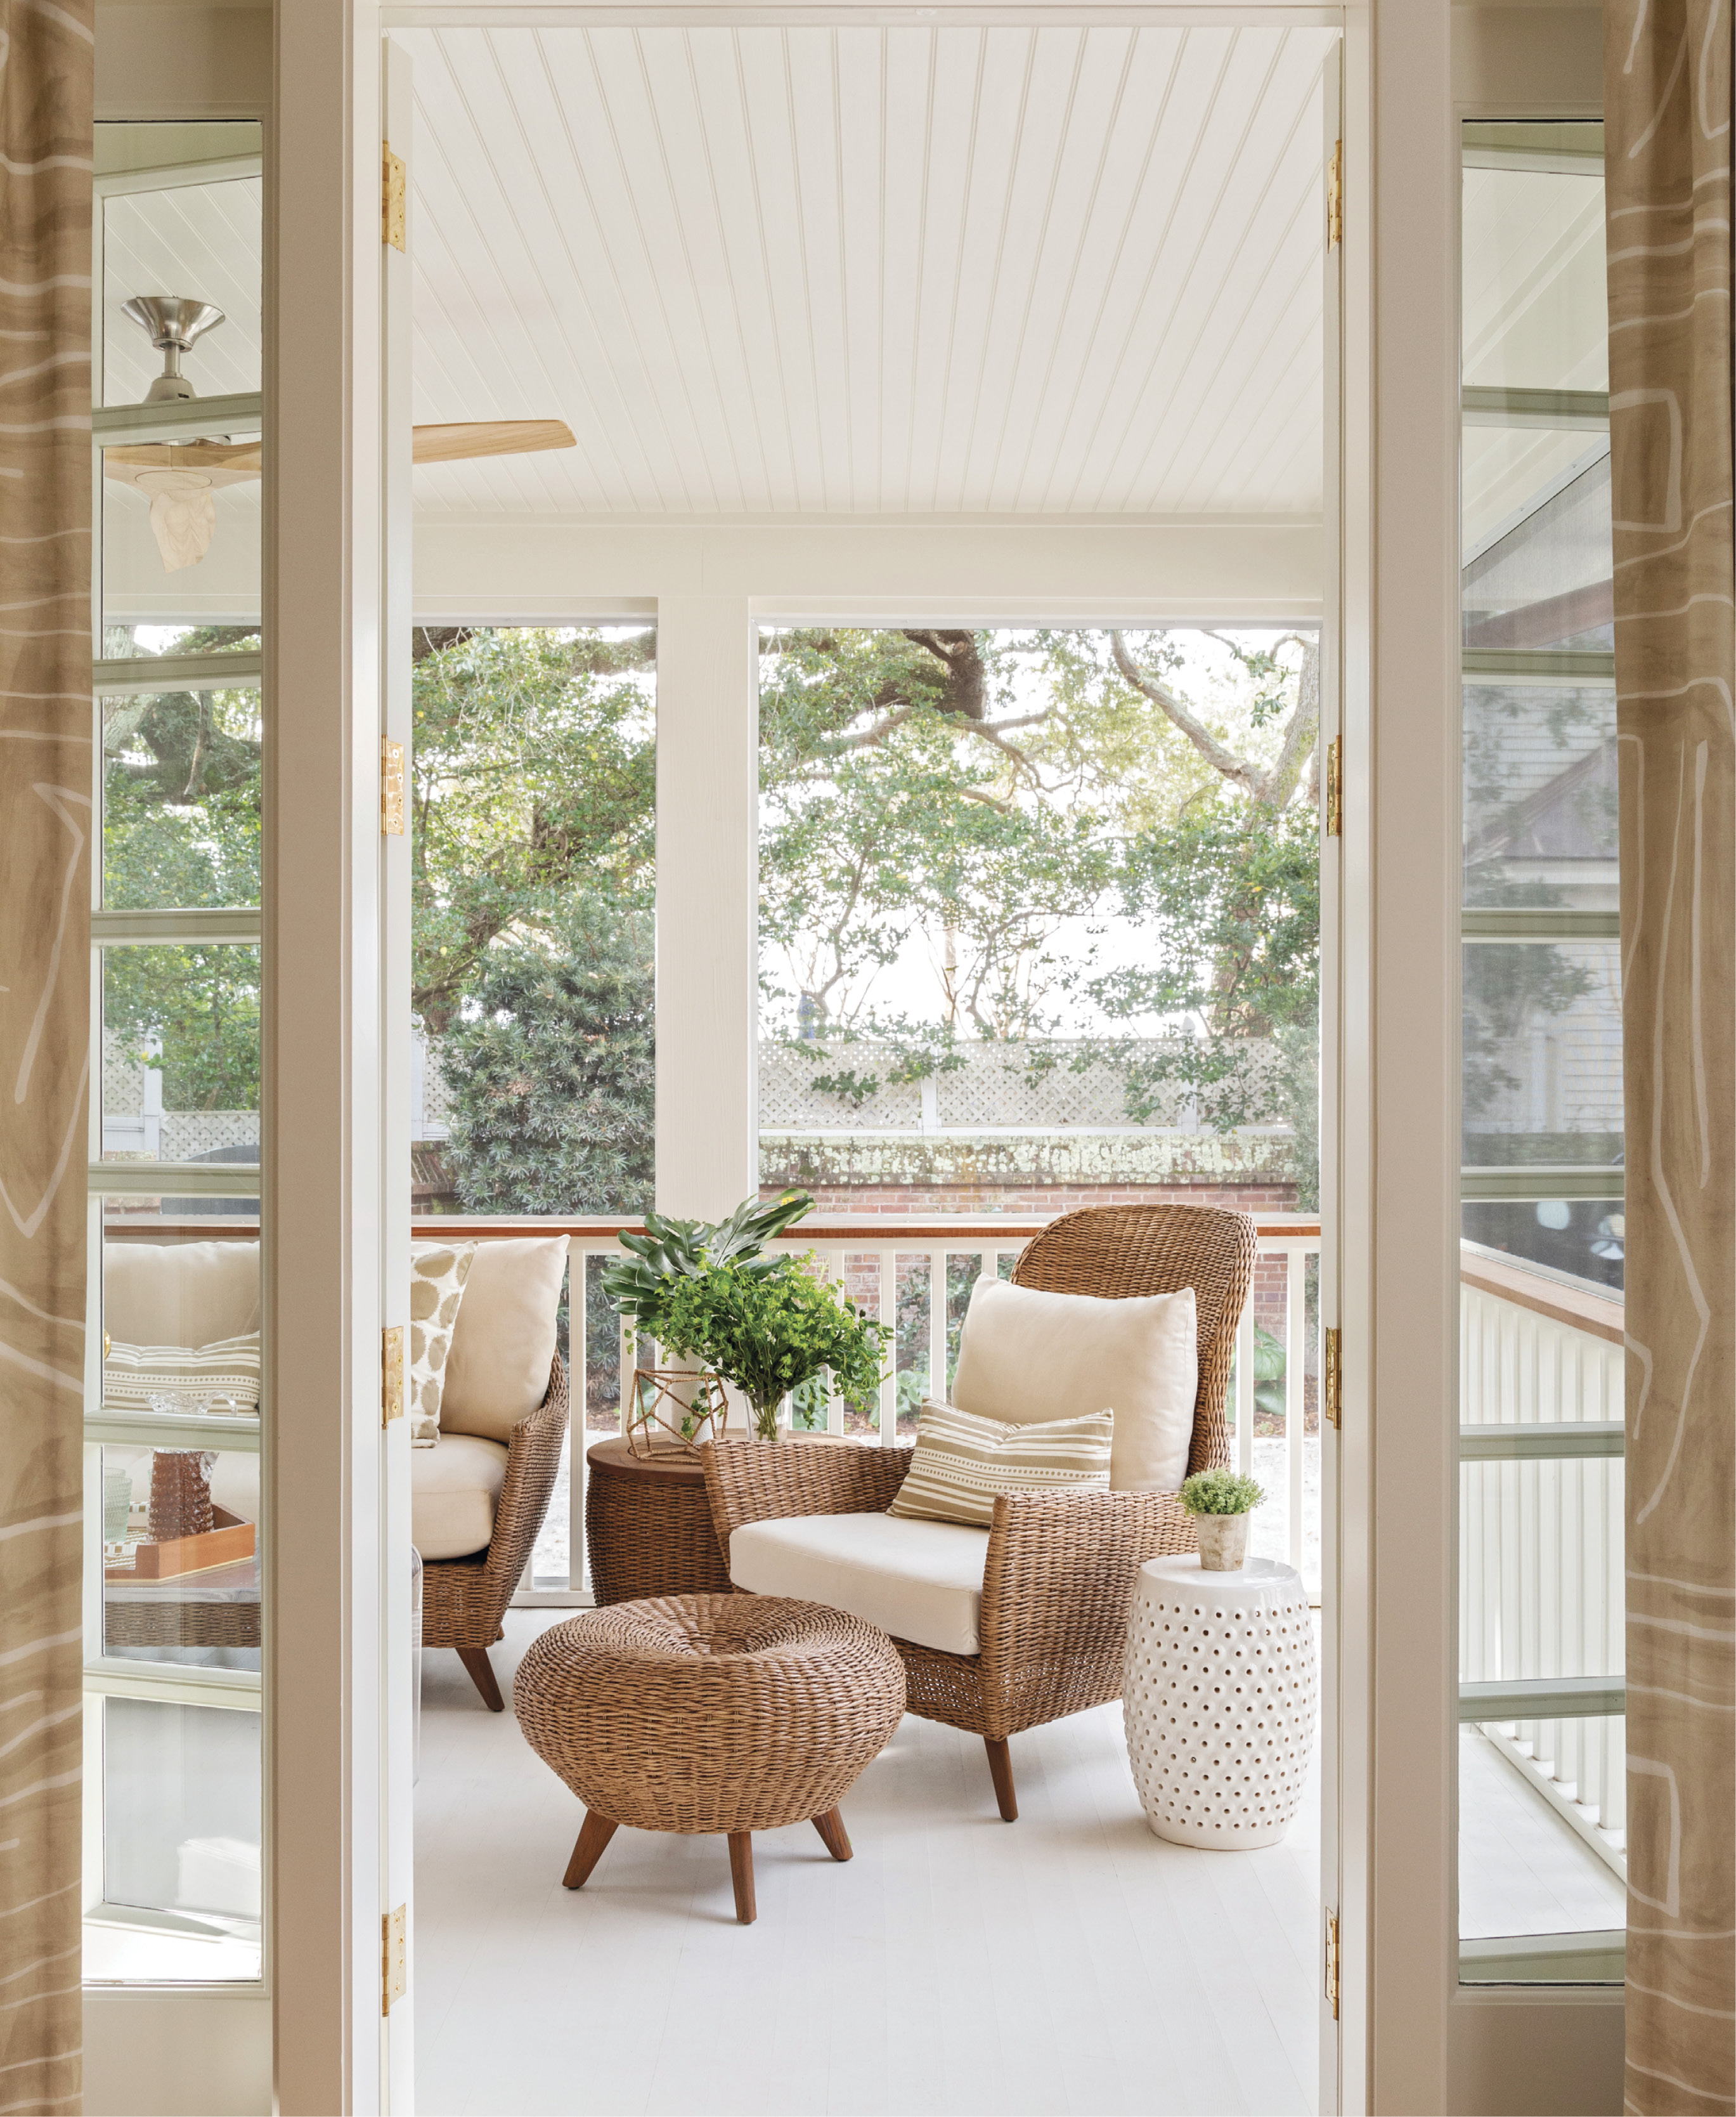 OUTDOORS IN: A glassed-in sun-room was converted into a screened porch to provide more airflow and outdoor space. The Lloyd Flanders sofa from GDC Charleston is often the domain of older Lab, Margot.